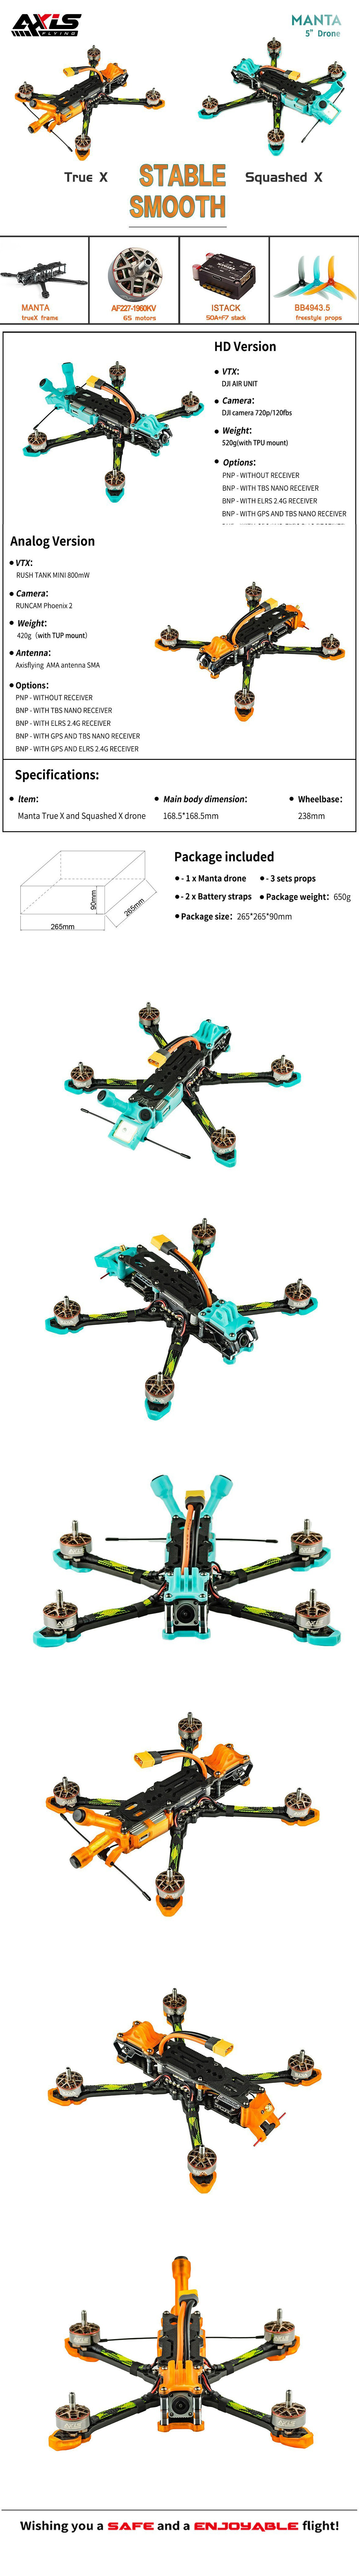 Axisflying MANTA5" / 5inch fpv freestyle Ture X / Squashed X DJI O3 Air Unit with GPS -6S MANTA 5" DRONE  cinematic drone,cinewhoop drone,longrange drone,freestyle drone,fpv drone,fpv quads,5inch freestyle drone,7inch longrange drone,5inch quads,6inch quads,7inch LR quads,7" fpv drone,7" fpv quads,7" longrange quads,6" cinematic quads,5"cinematic drone,DJI O3,DJI O3 Air Unit